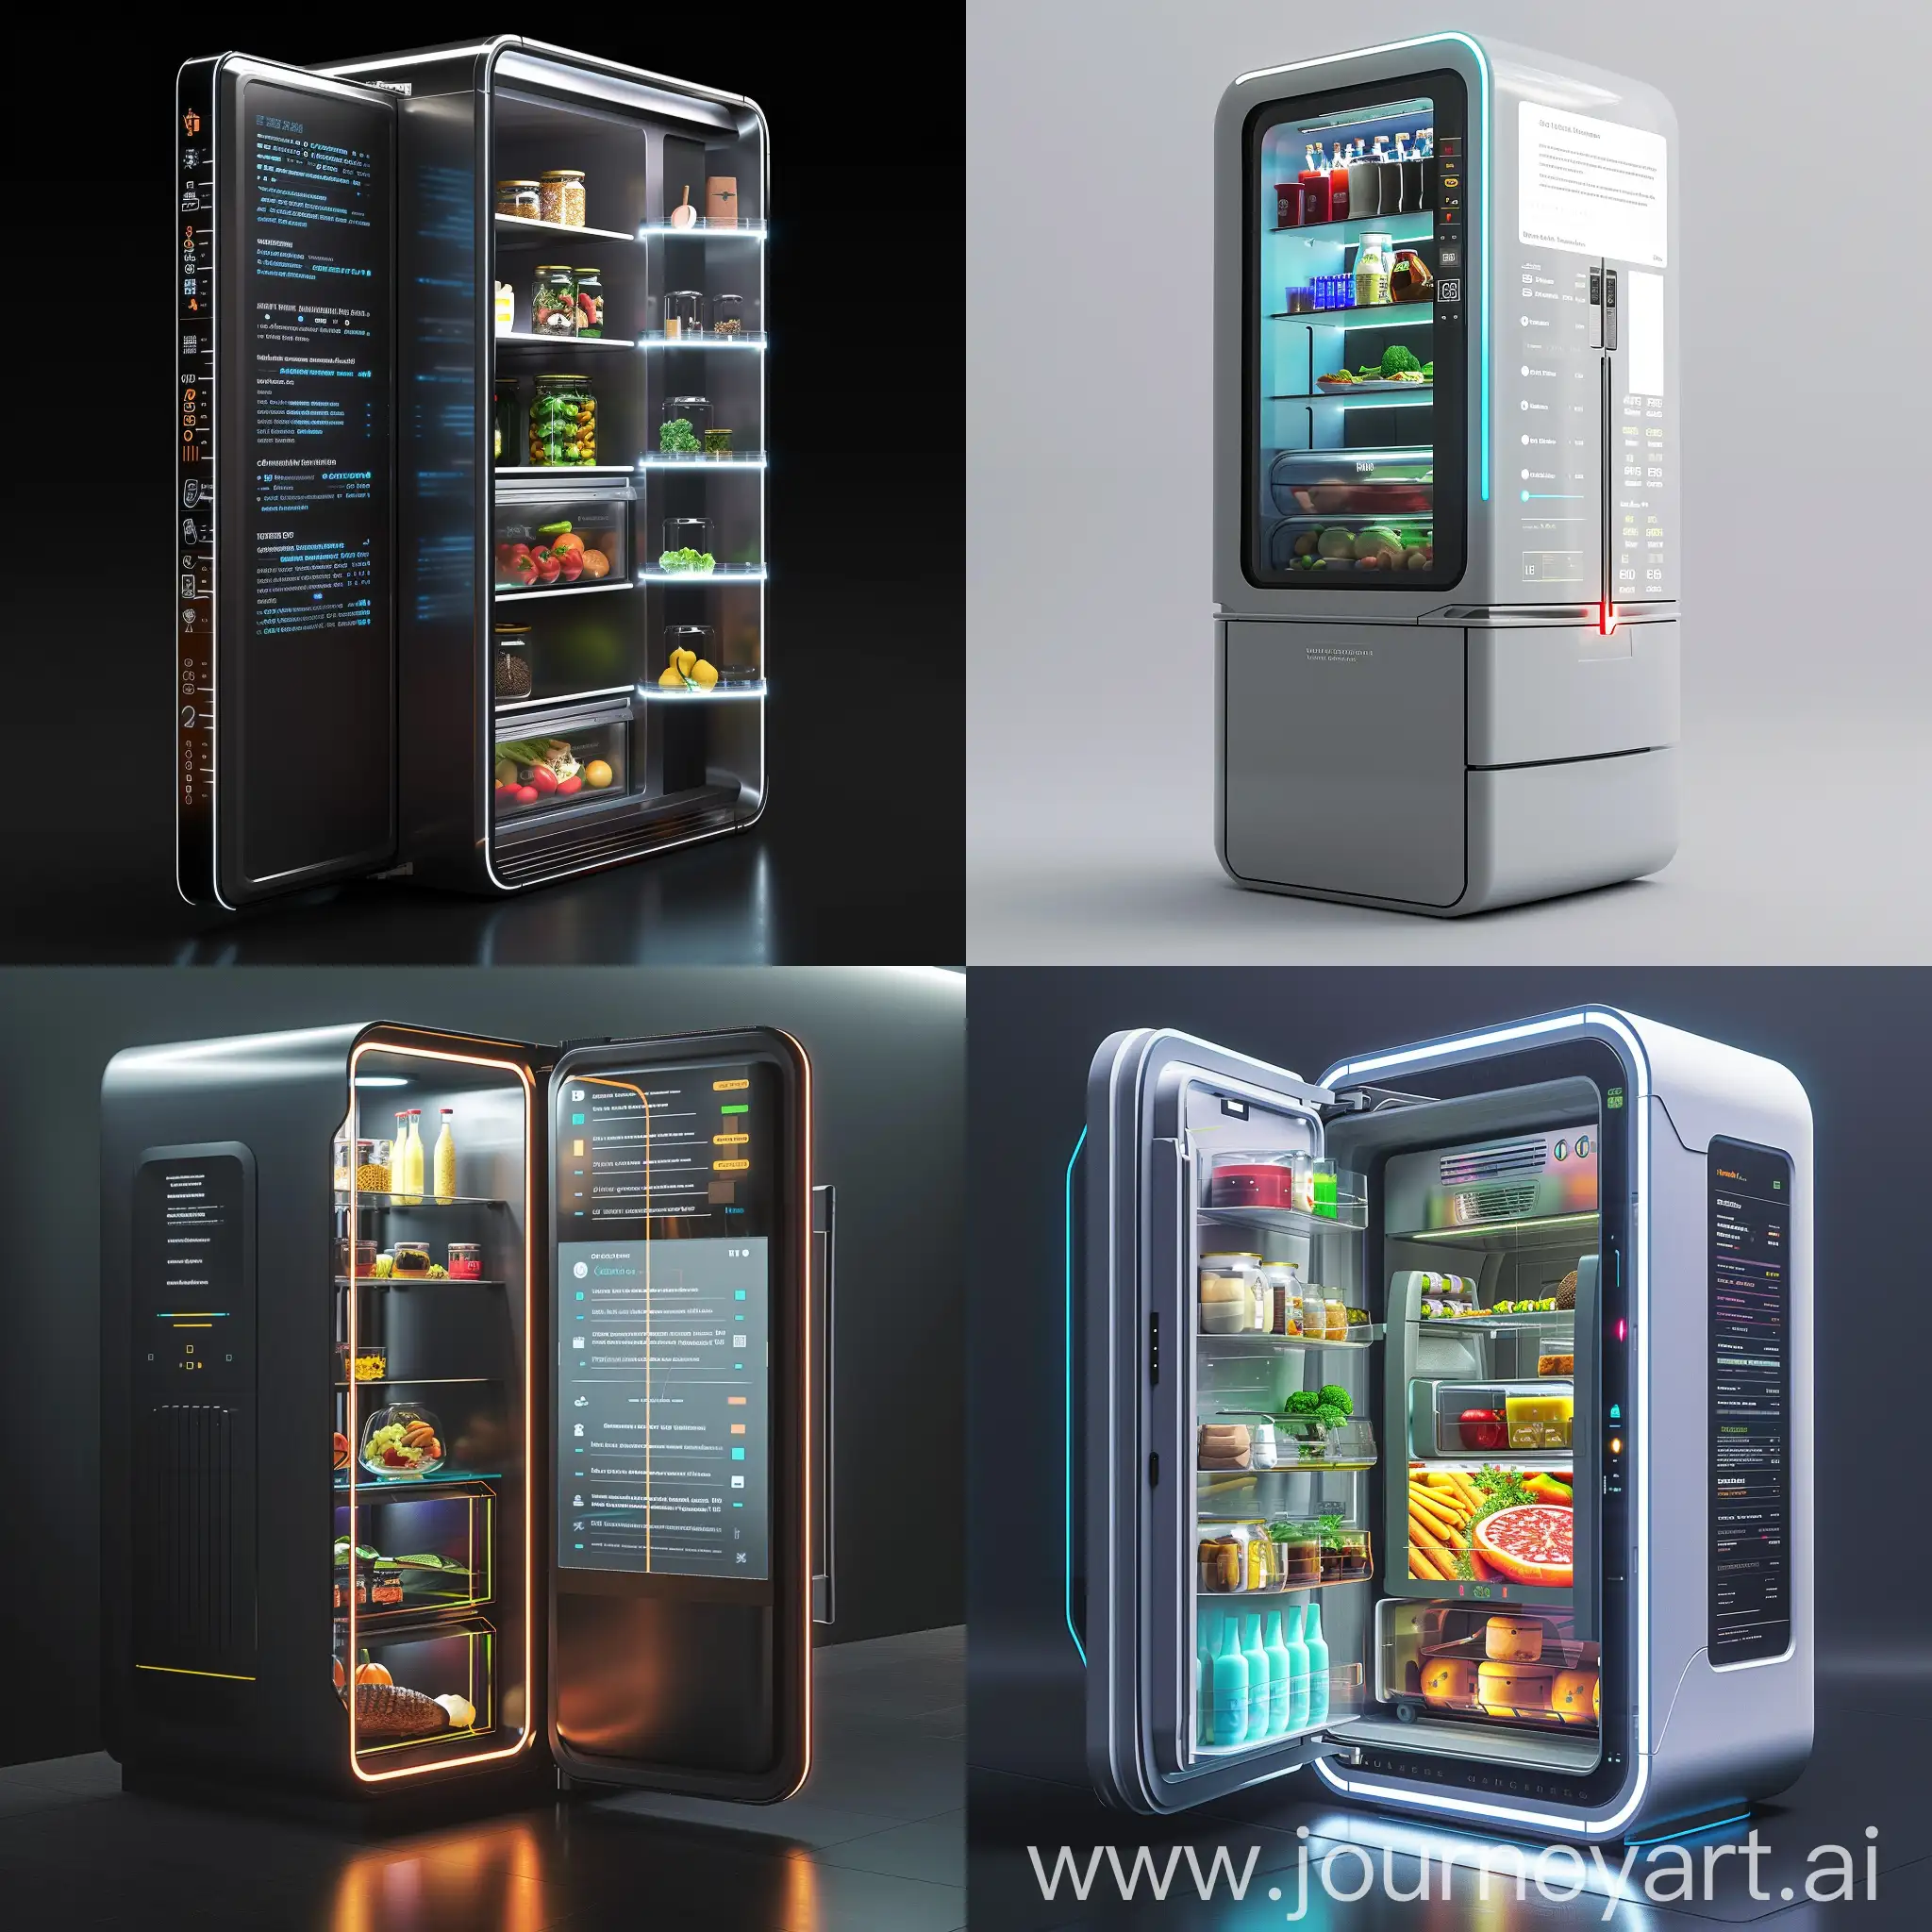 Futuristic fridge, information age of future, AI-Powered Food Management System, Self-Sanitizing Surfaces, Modular Storage Units, Holographic Display, Energy-Efficient Cooling System, Energy-Efficient Cooling System, Built-In Nutrient Scanner, Automatic Inventory Replenishment, Smart Energy Management, Virtual Assistant Integration, Blockchain-Based Food Traceability, Augmented Reality Recipe Guidance, Predictive Maintenance Analytics, Cloud-Based Recipe Database, IoT Sensors for Food Quality Monitoring, Data-Driven Food Preservation, Social Media Integration for Recipe Sharing, Personalized Health Tracking, Gamified Food Waste Reduction, Collaborative Cooking Platform, Nano-coating Exterior, Transparent OLED Display, Smart Lighting System, Interactive Touch Controls, Integrated Smart Assistant, Aerodynamic Design, Hidden Handles, Biometric Security System, Advanced Insulation Materials, Customizable Exterior Panels, Augmented Reality Shopping Interface, E-Ink Display for Dynamic Messaging, Digital Art Gallery Mode, Social Media Integration for Food Sharing, Location-Based Weather Forecast, QR Code Food Label Scanner, Interactive Health Monitoring, Virtual Cooking Classes, Environmental Impact Tracker, Community Recipe Exchange, unreal engine 5 --stylize 1000